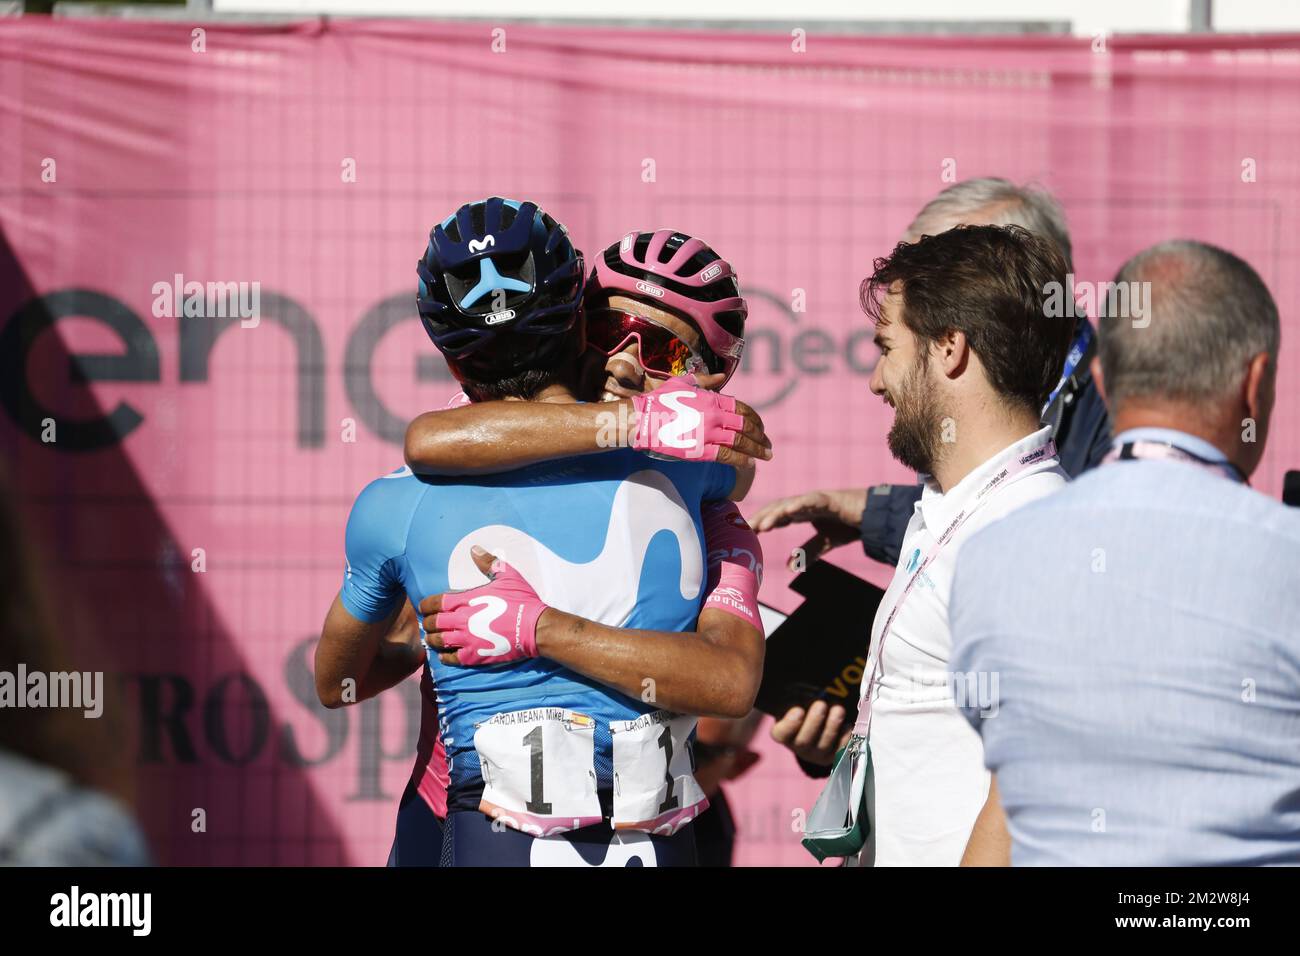 Spanish Mikel Landa of Movistar Team and Ecuadorian Richard Carapaz of Movistar Team celebrates after the twentieth stage of the 101st edition of the Giro D'Italia cycling race, 194km from Feltre to Croce d'Aune-Monte Avena, Italy, Saturday 01 June 2019. BELGA PHOTO YUZURU SUNADA FRANCE OUT  Stock Photo